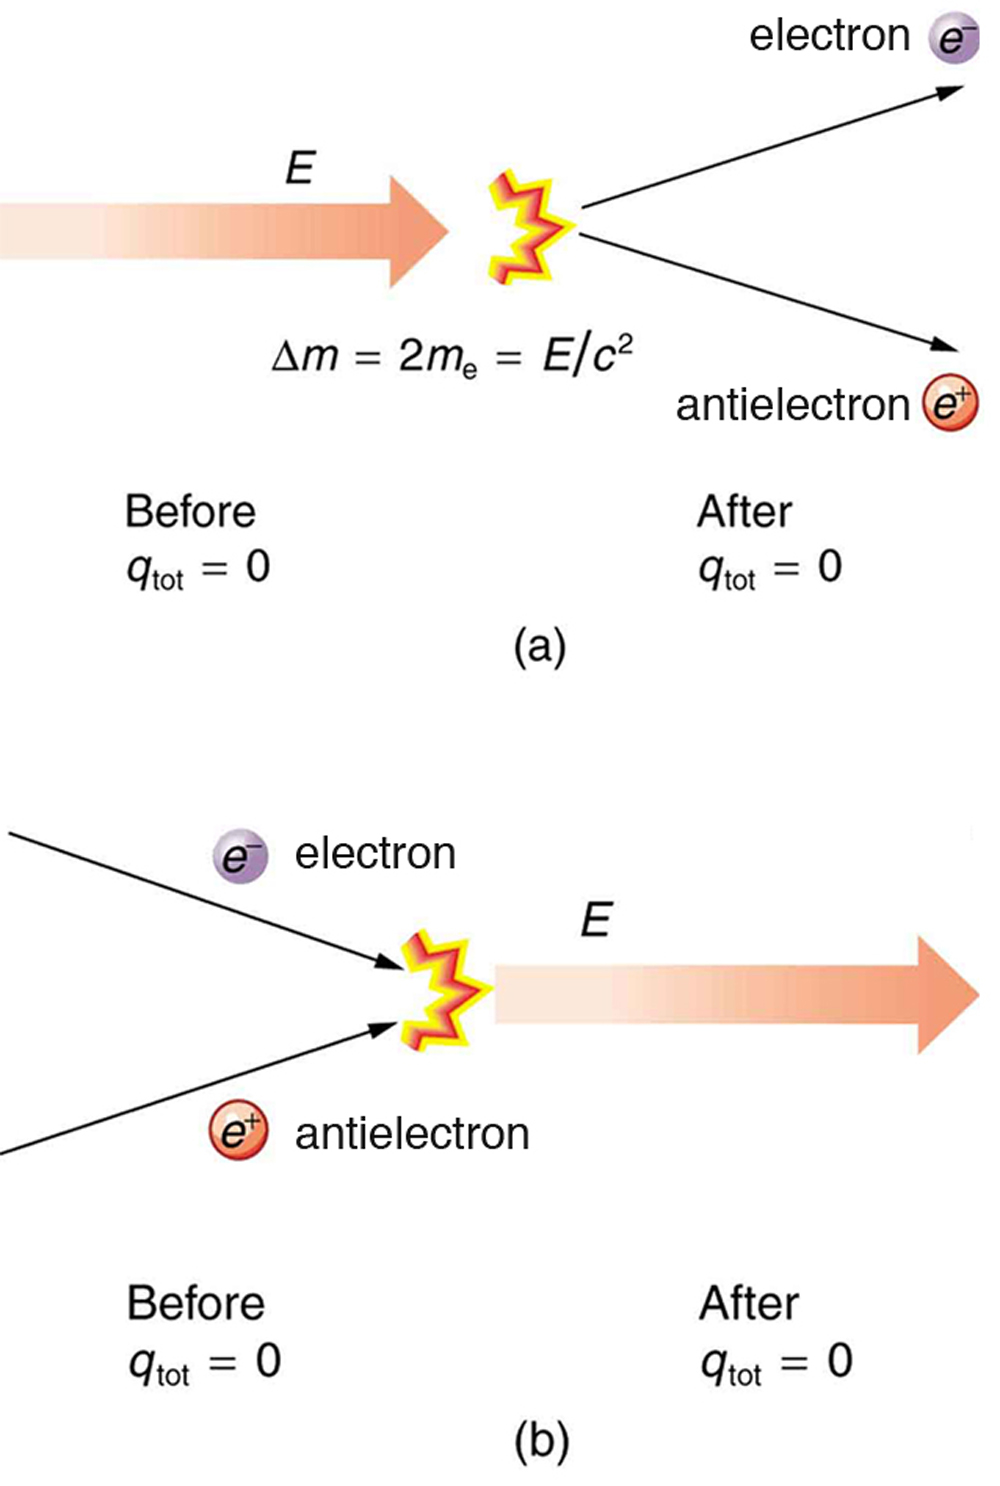 Here energy is shown by a vector. Initially electrostatic charge q tot is equal to zero. Now energy gets converted into matter and creates one electron and antielectron pair but final electrostatic charge is equal to zero so change in mass delta m is equal to two m e, which is equal to E divided by c square. (b) In this figure, Electron and antielectron are colliding with each other. The electrostatic charge q tot before collision is zero and after collision it will remain zero.